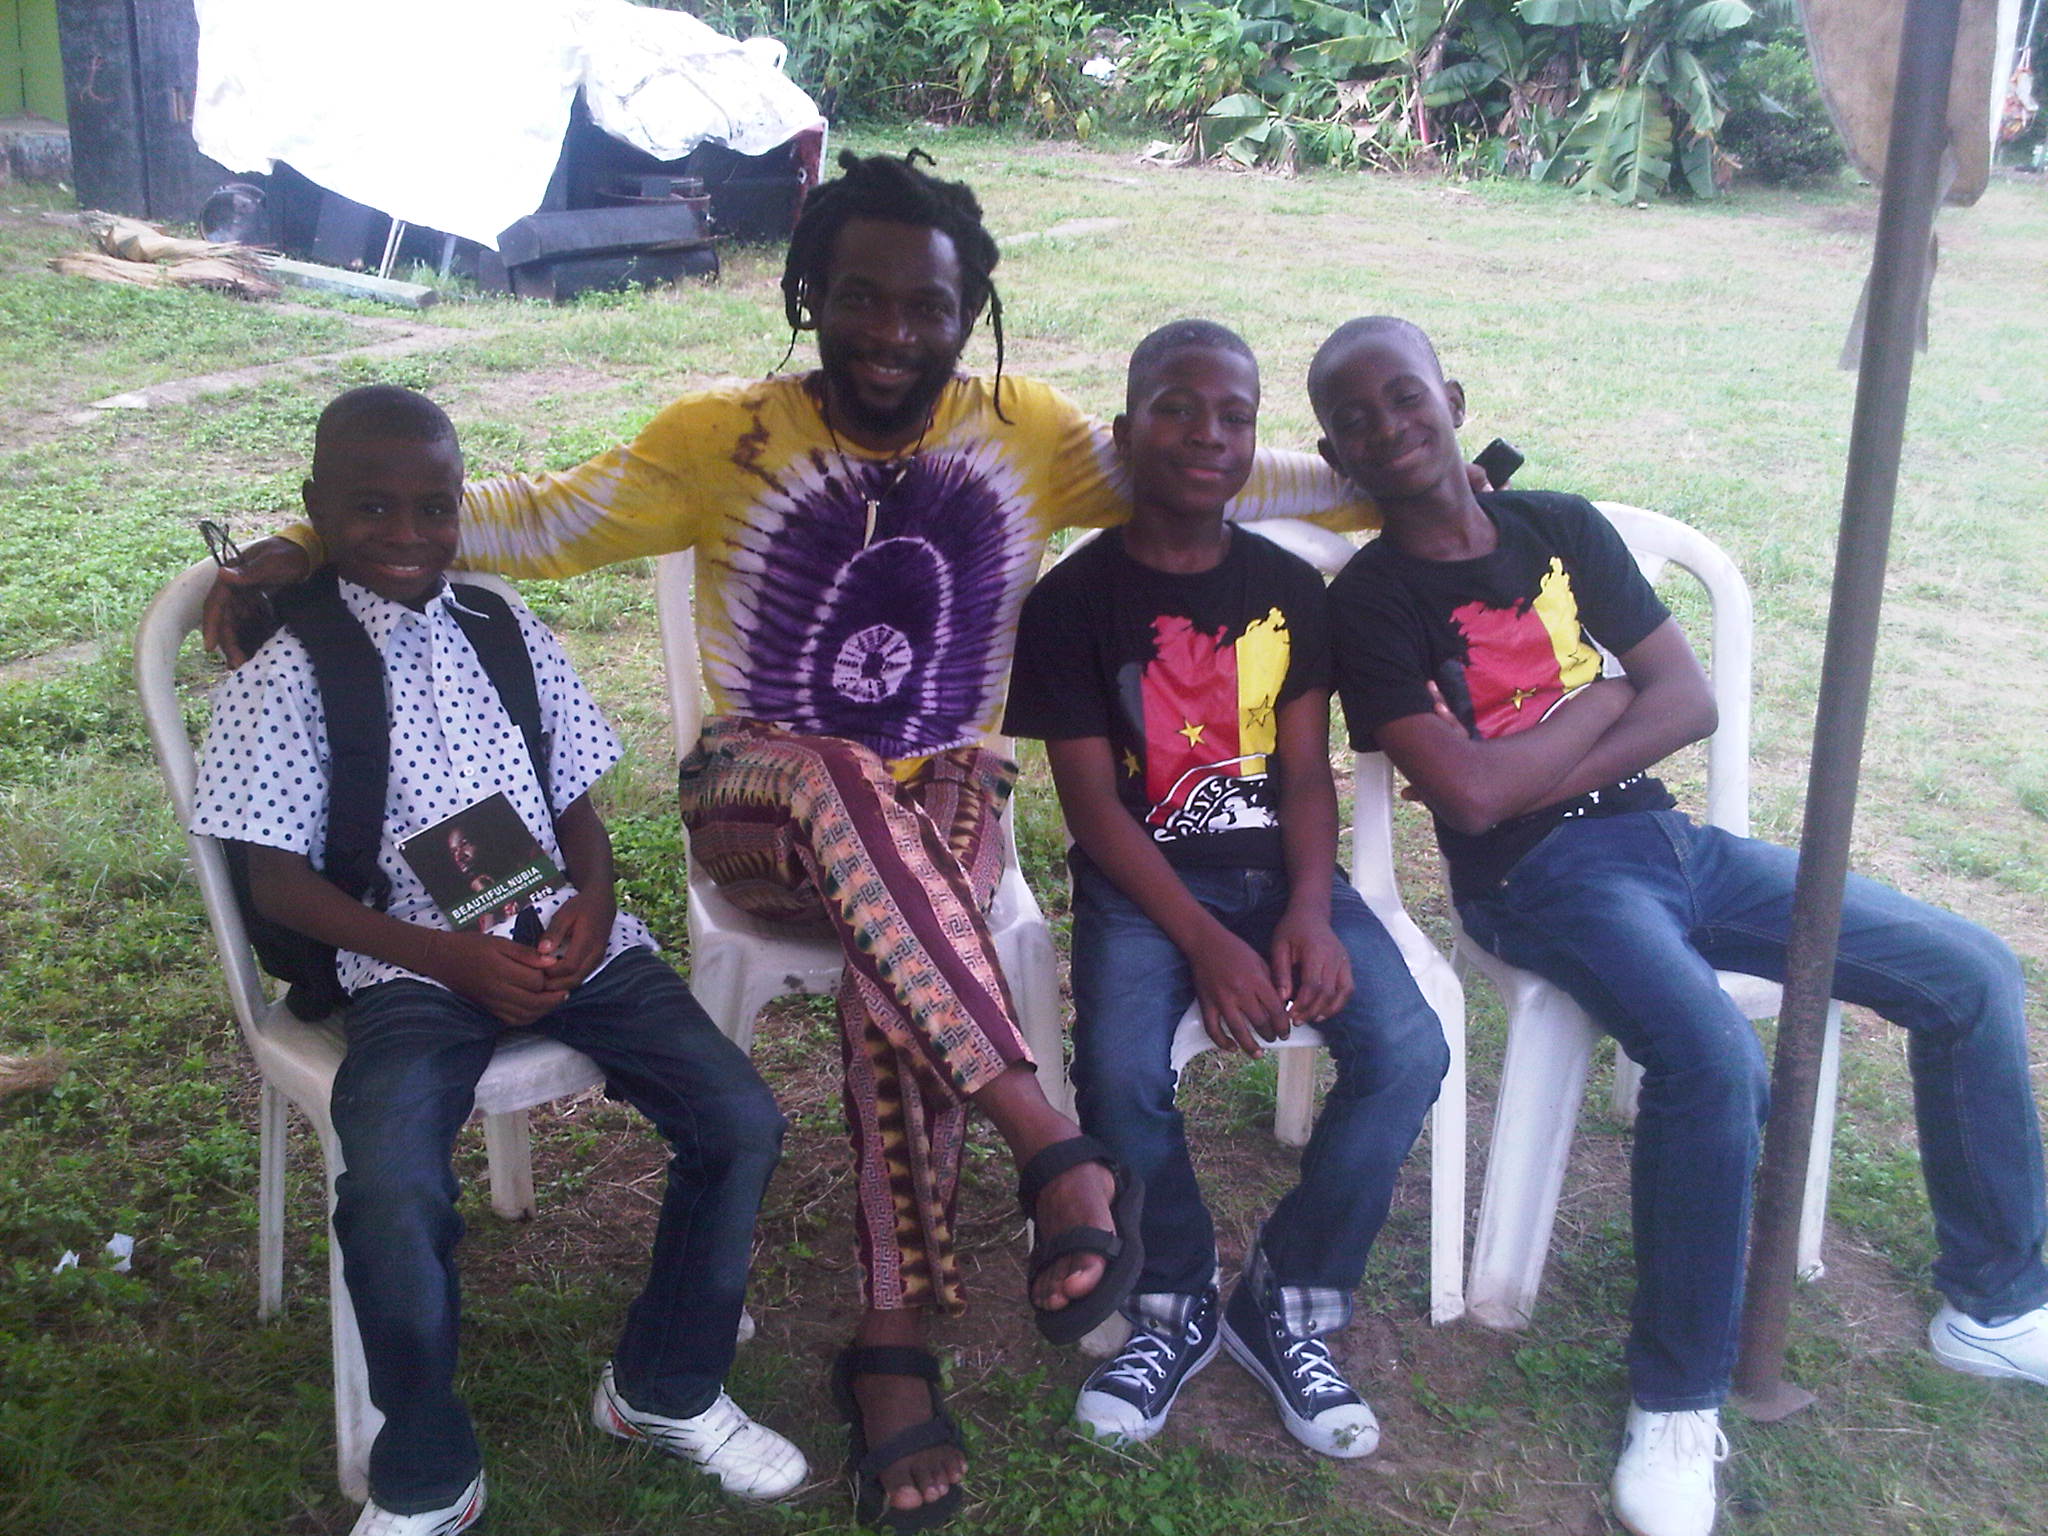 Photo: My 3 sons pose for a photo with the musician - Beautiful Nubia - just after completing their 3 hour FREE Music Workshop session at his EniObanke Arts Centre at the Ikeja-GRA premises.